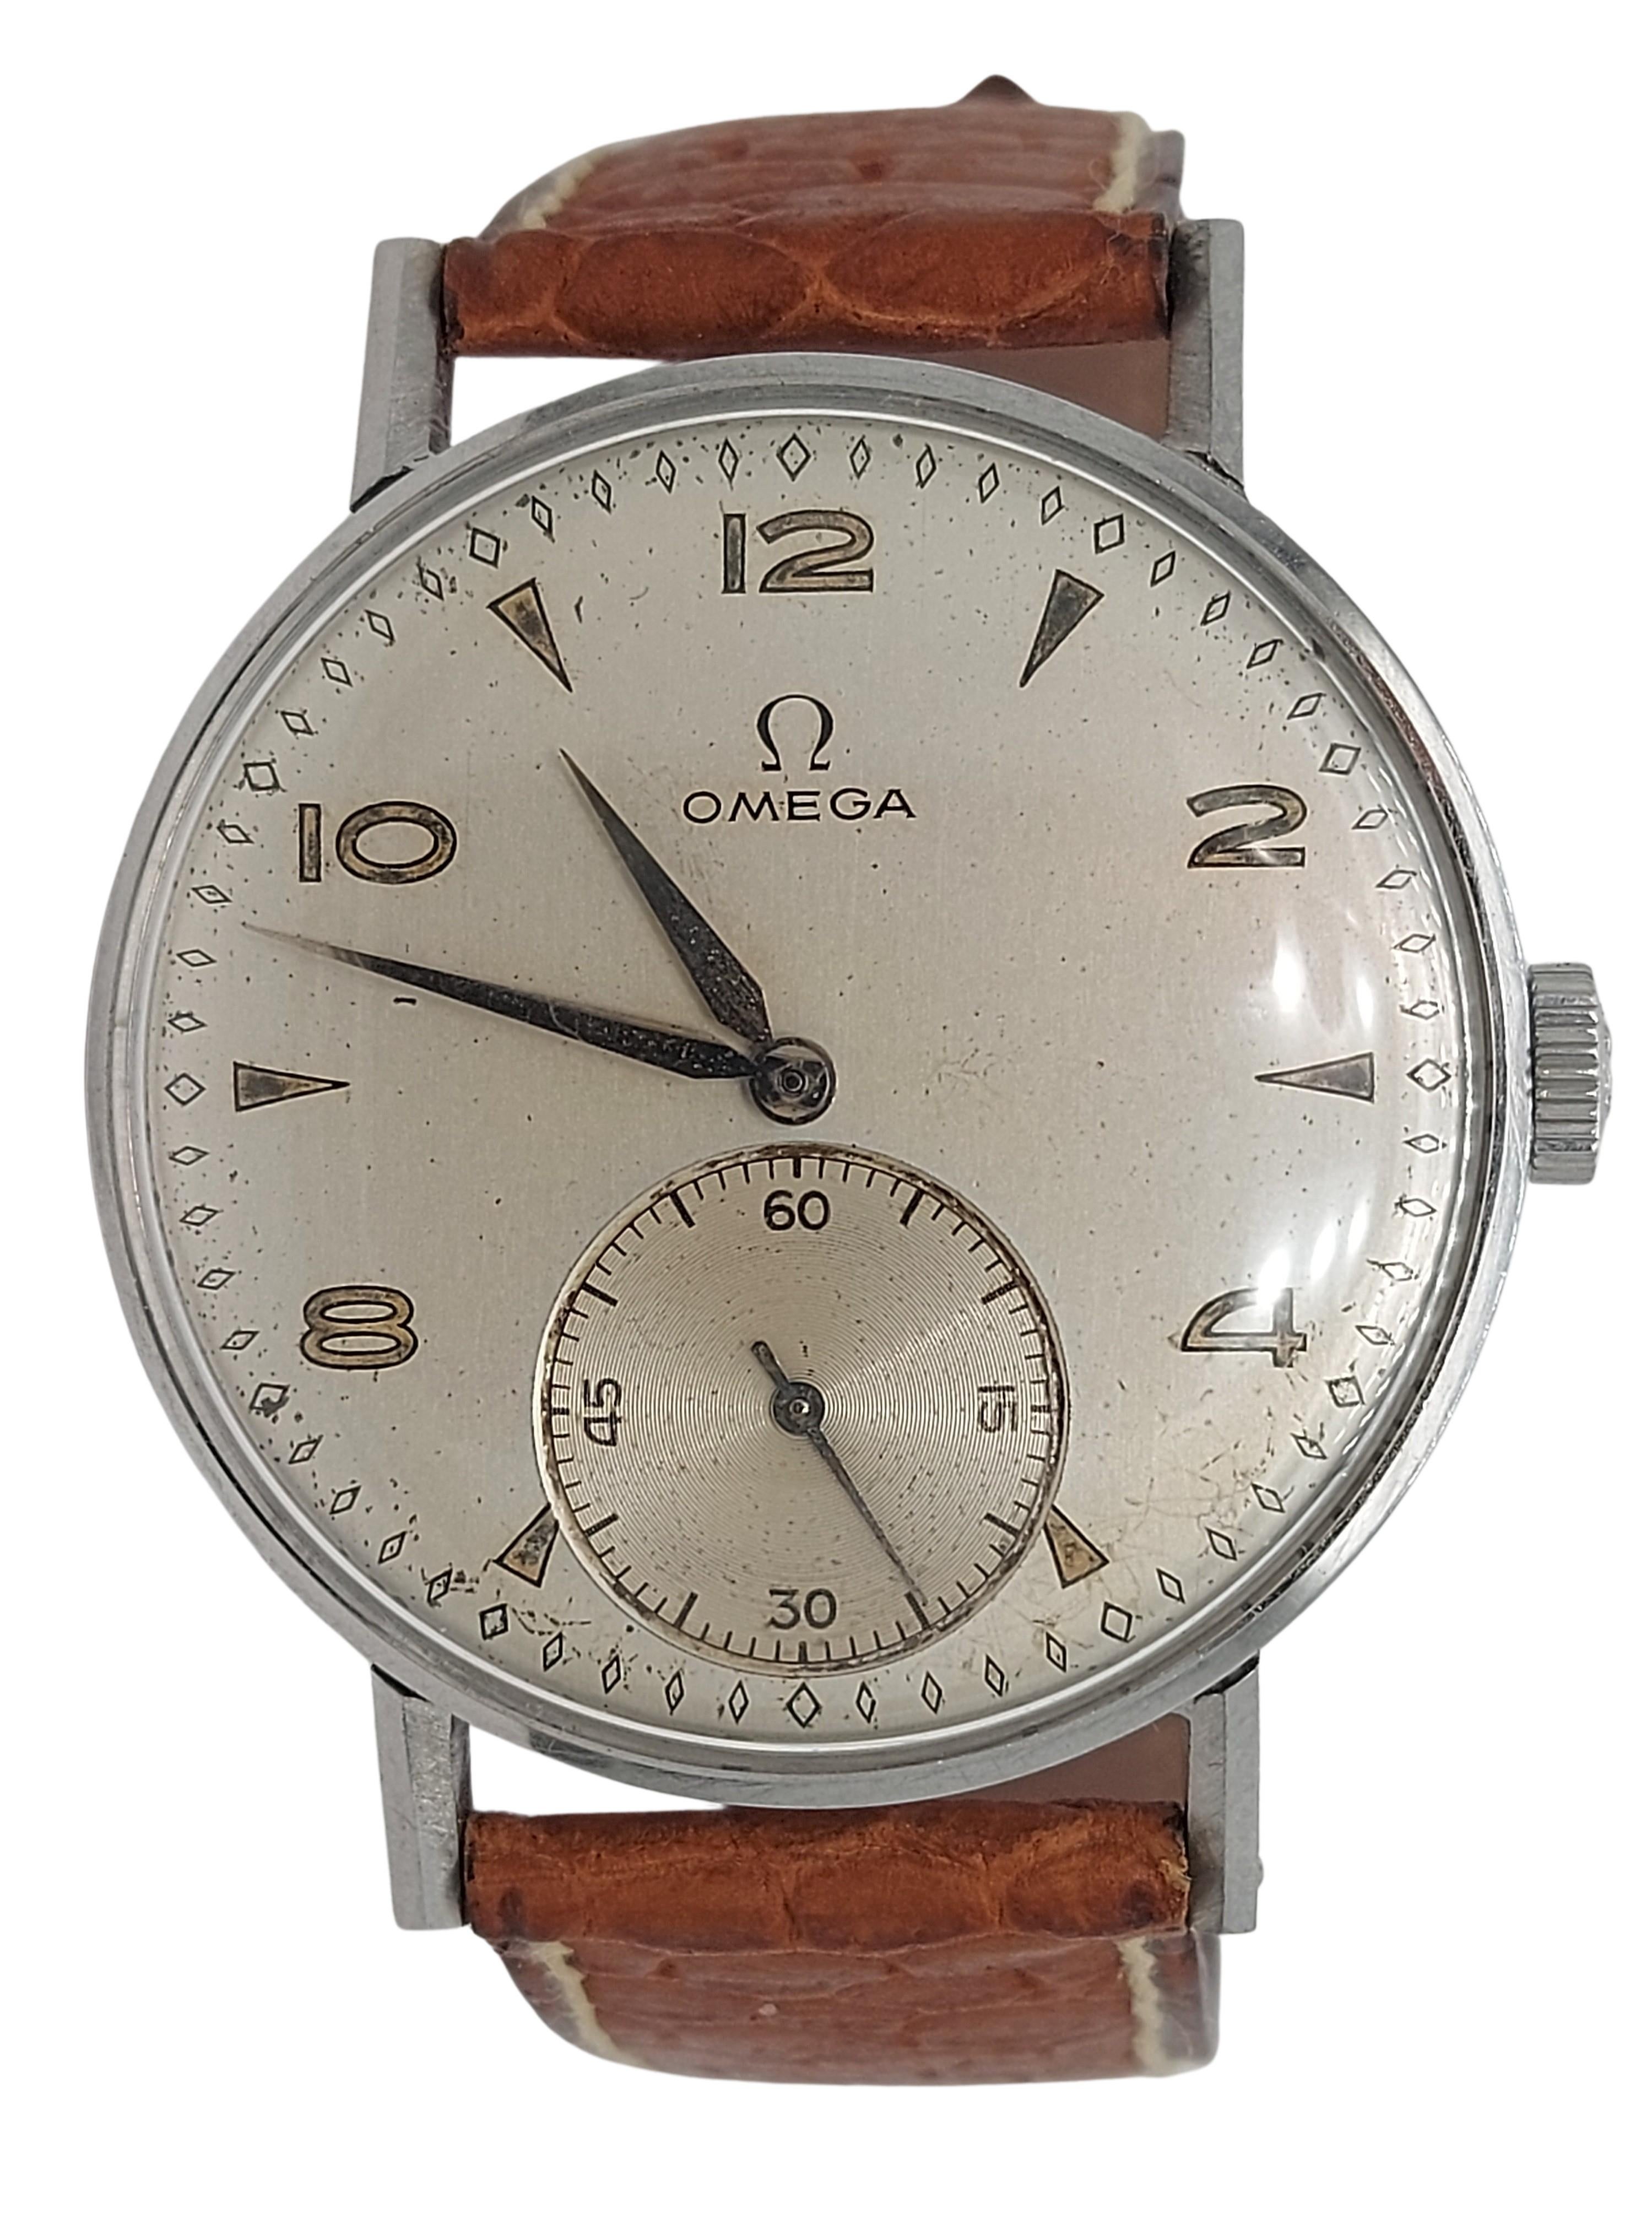 Omega Stainless Steel wristwatch, Manual Winding, Diameter 32.5 mm,

Functions: Hour, minutes, Subsidiary seconds

Movement: Mechanical Manual Winding, Ref 2390/5, Cal 30T2

Dial: Silver dial, Arabic numerals silver numerals and indexes

Case: